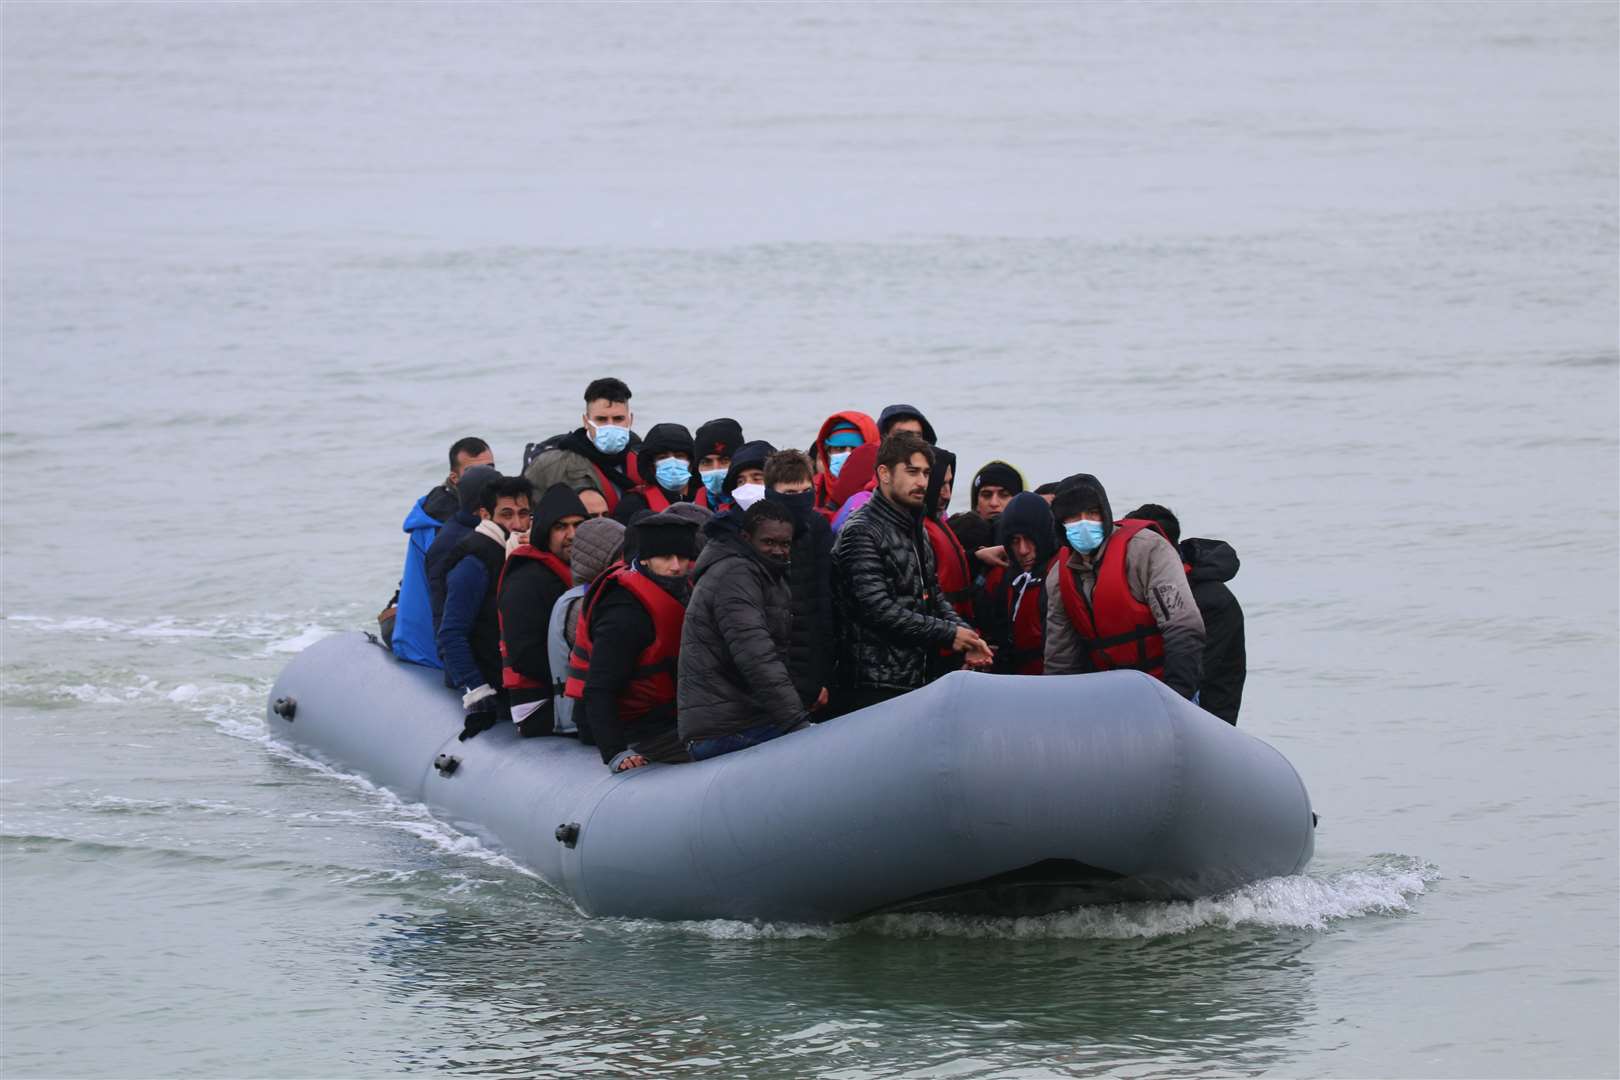 Asylum seekers have been coming to Kent in dinghies regularly over the last four years